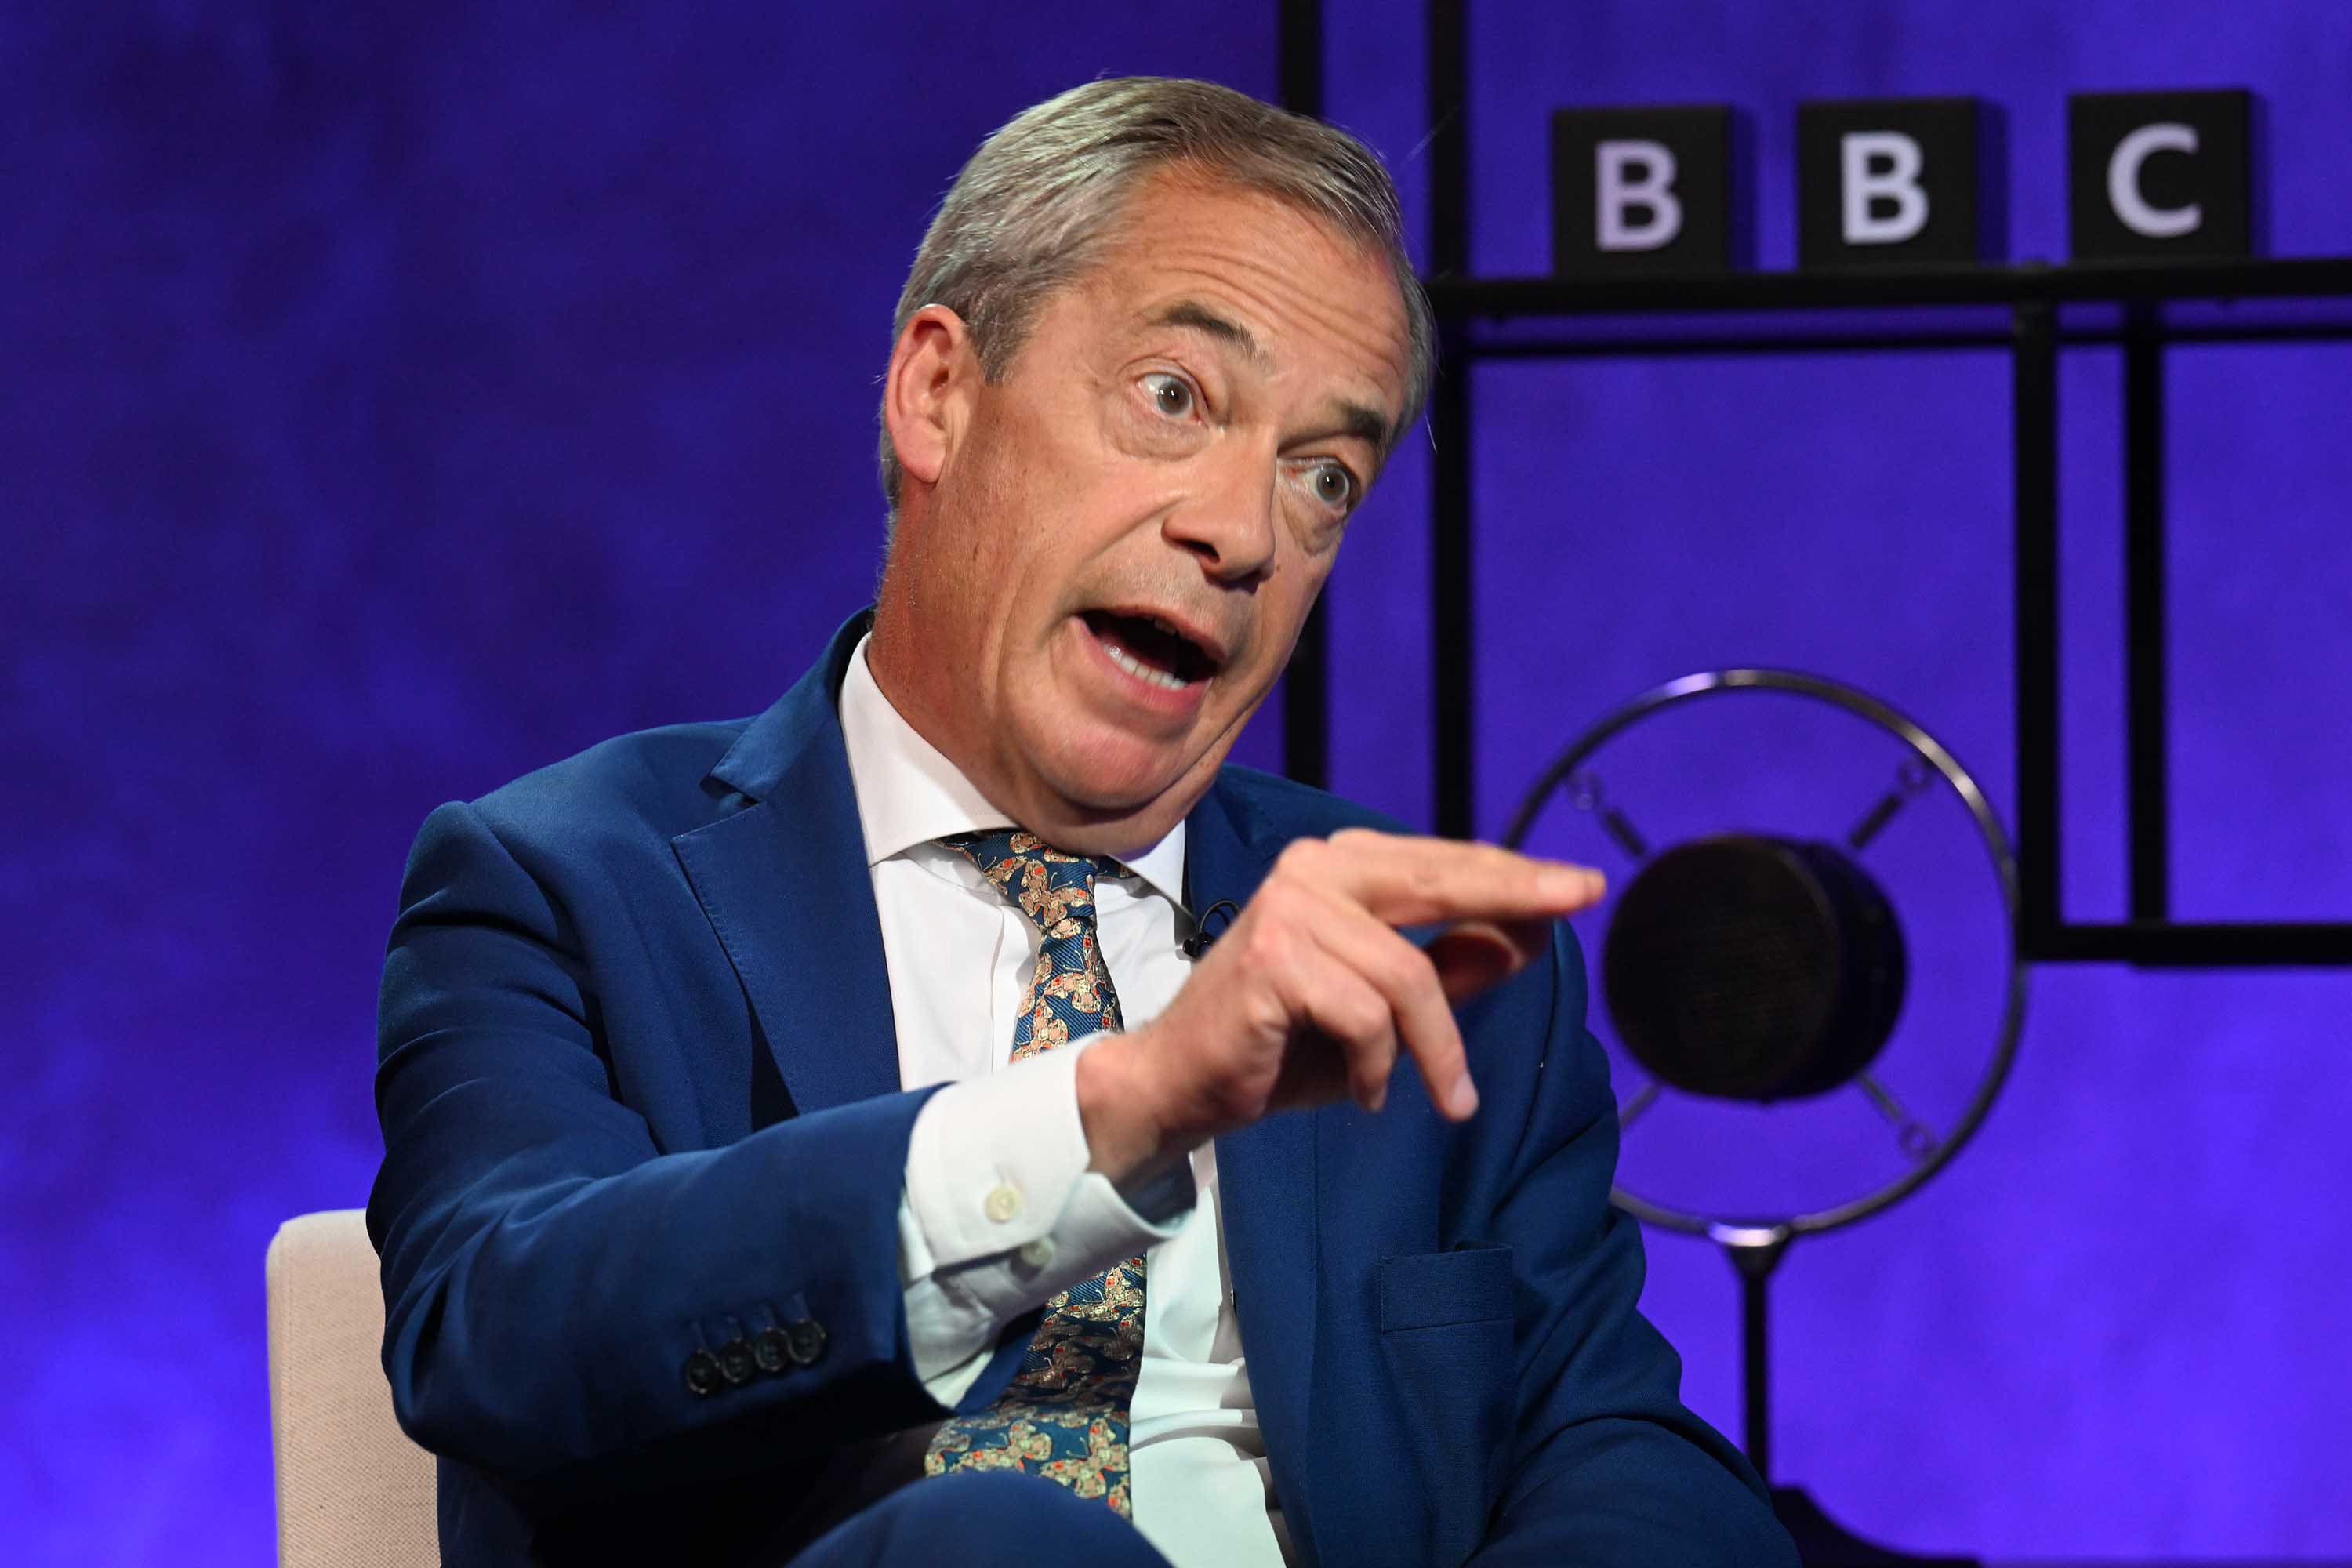 Nigel Farage has been accused of being a Putin apologist (Jeff Overs/BBC/PA)